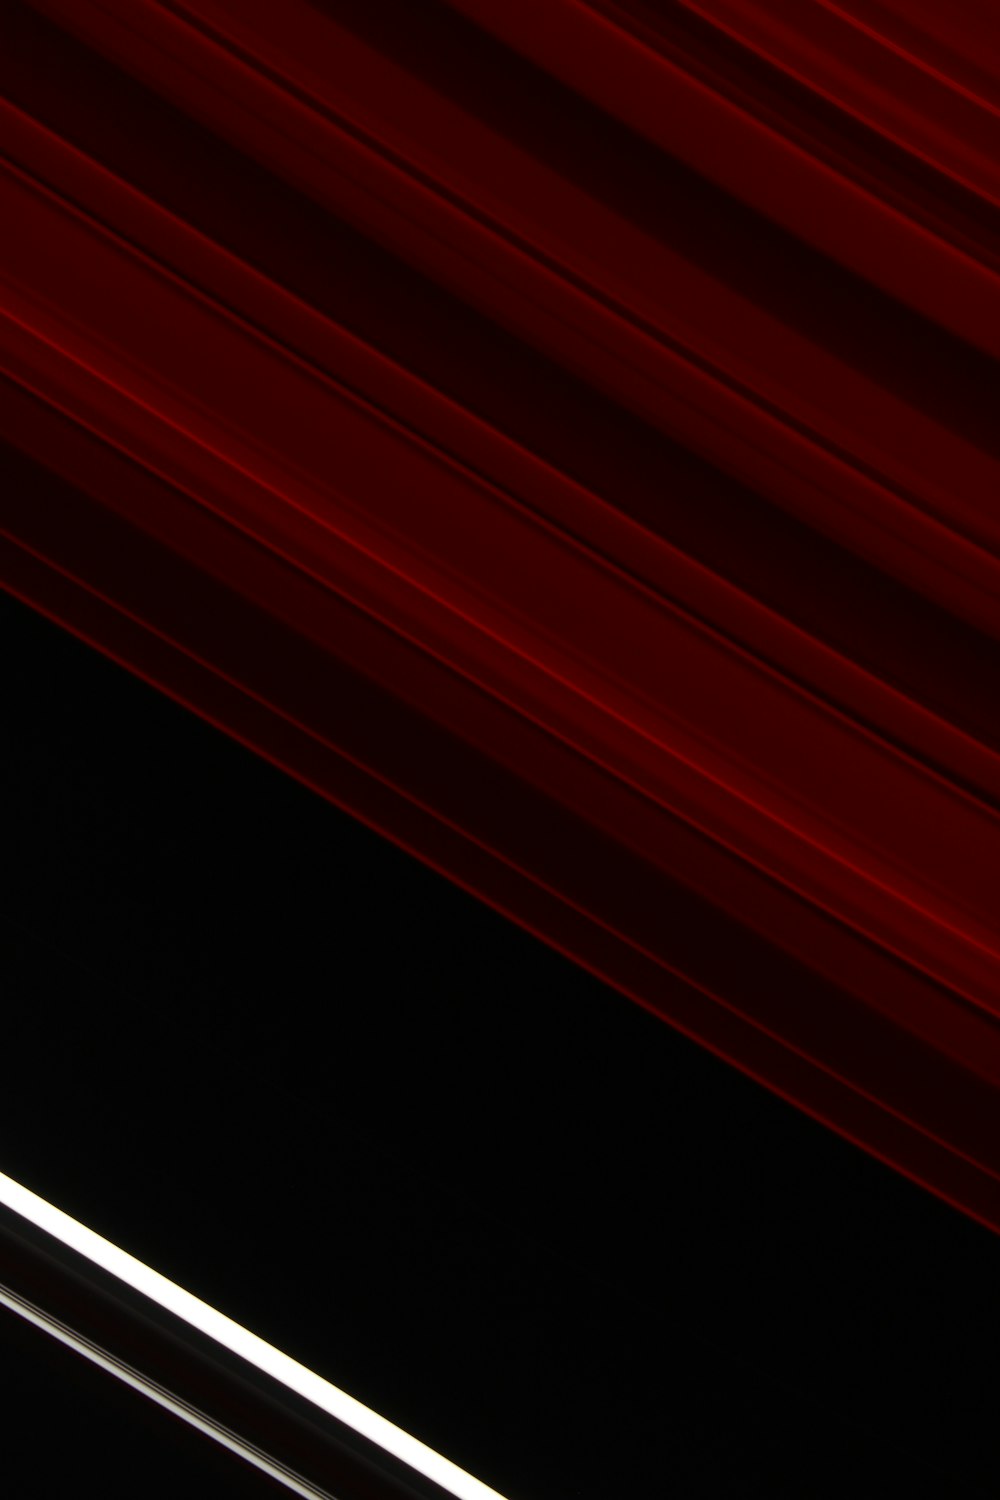 red stripes on a black background